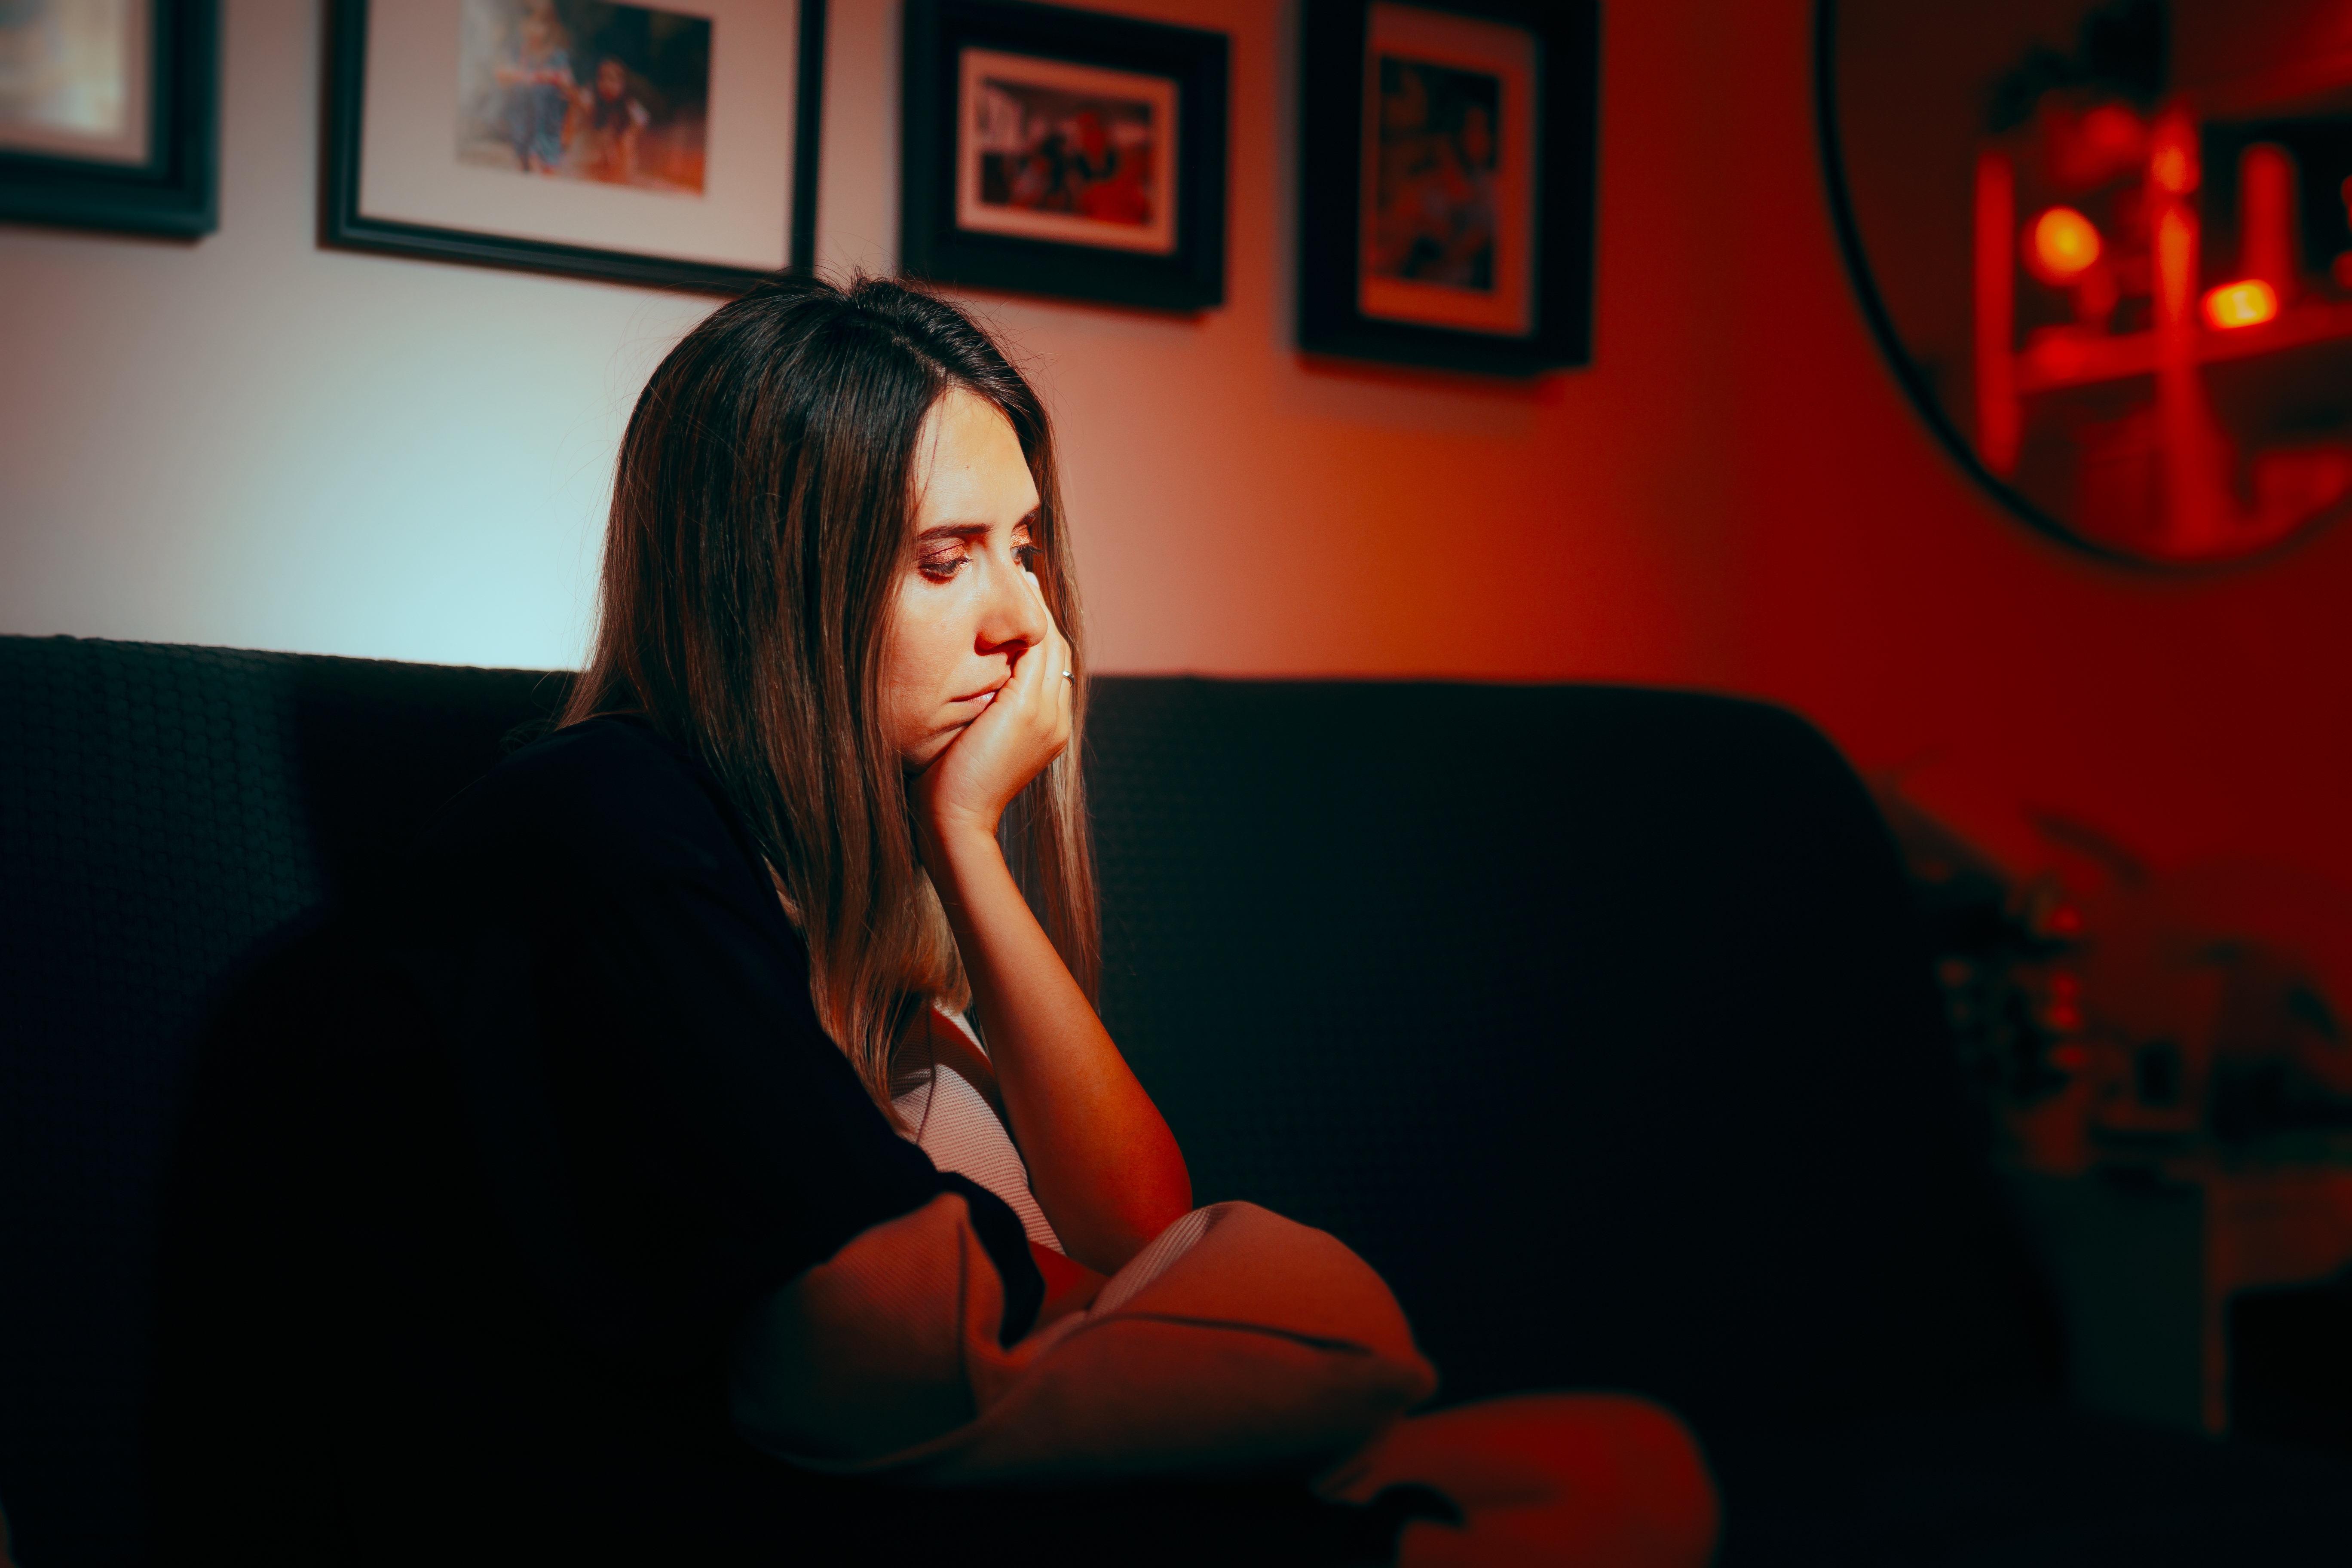 A distressed woman sitting on the couch | Source: Shutterstock